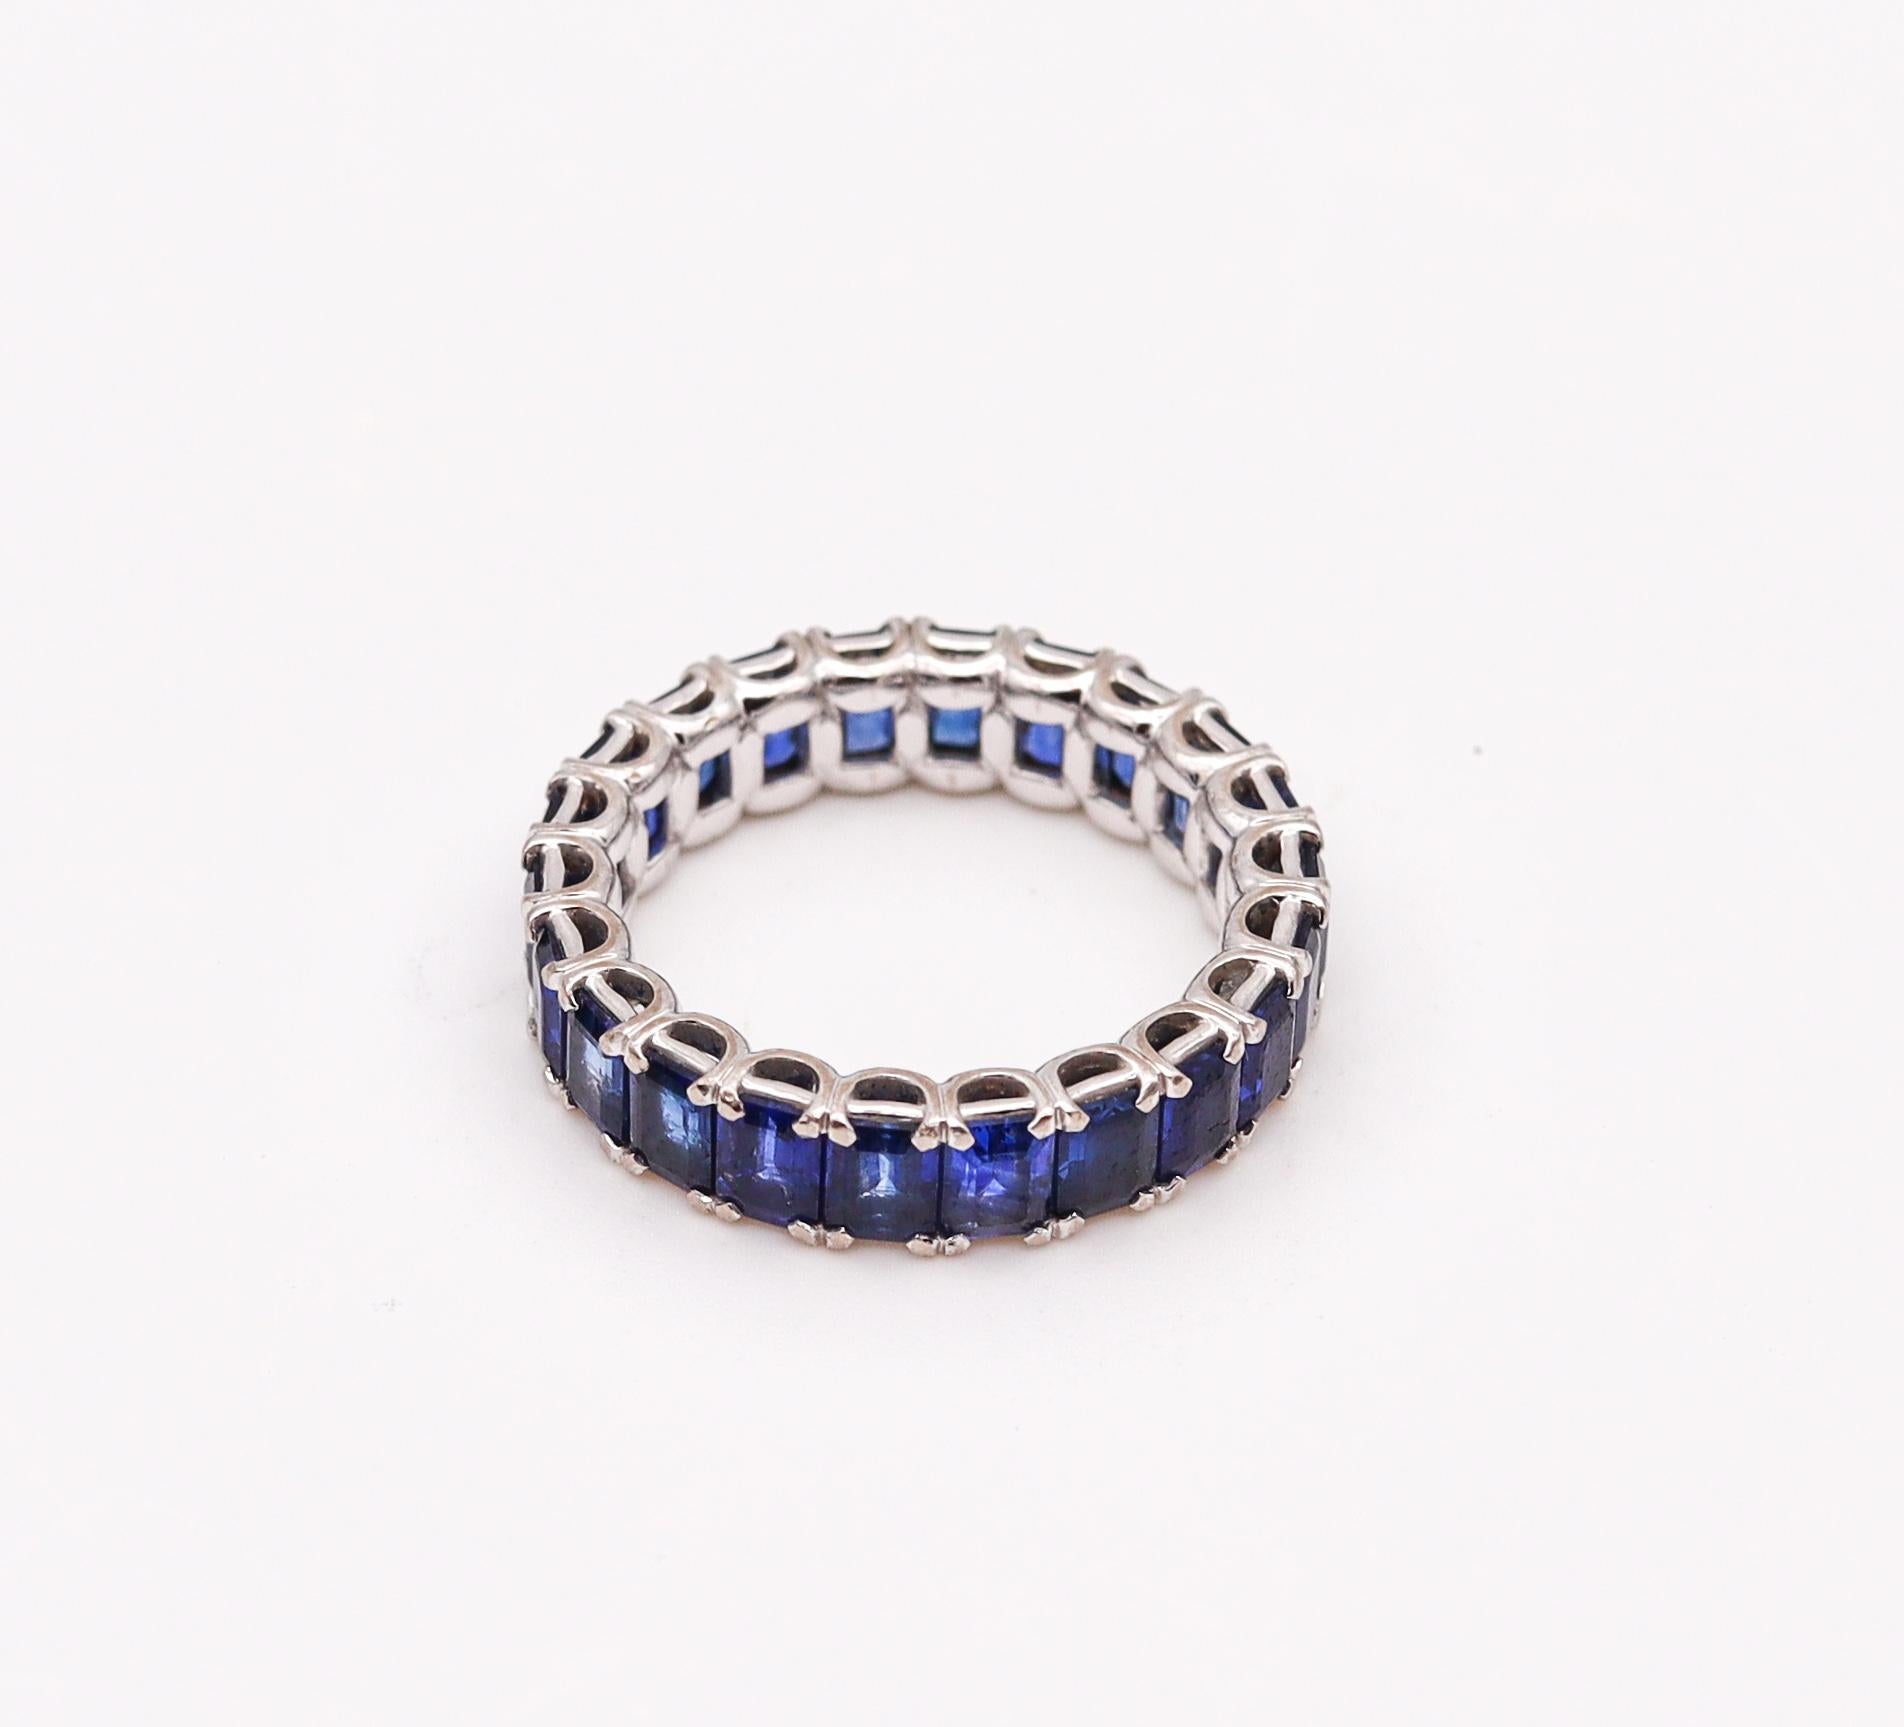 An eternity ring band with natural sapphires.

Contemporary eternity band crafted in America in solid white gold of 18 karats with high polished finish. It is mounted in four-prongs settings with 22 calibrated emerald cornered cuts of blue